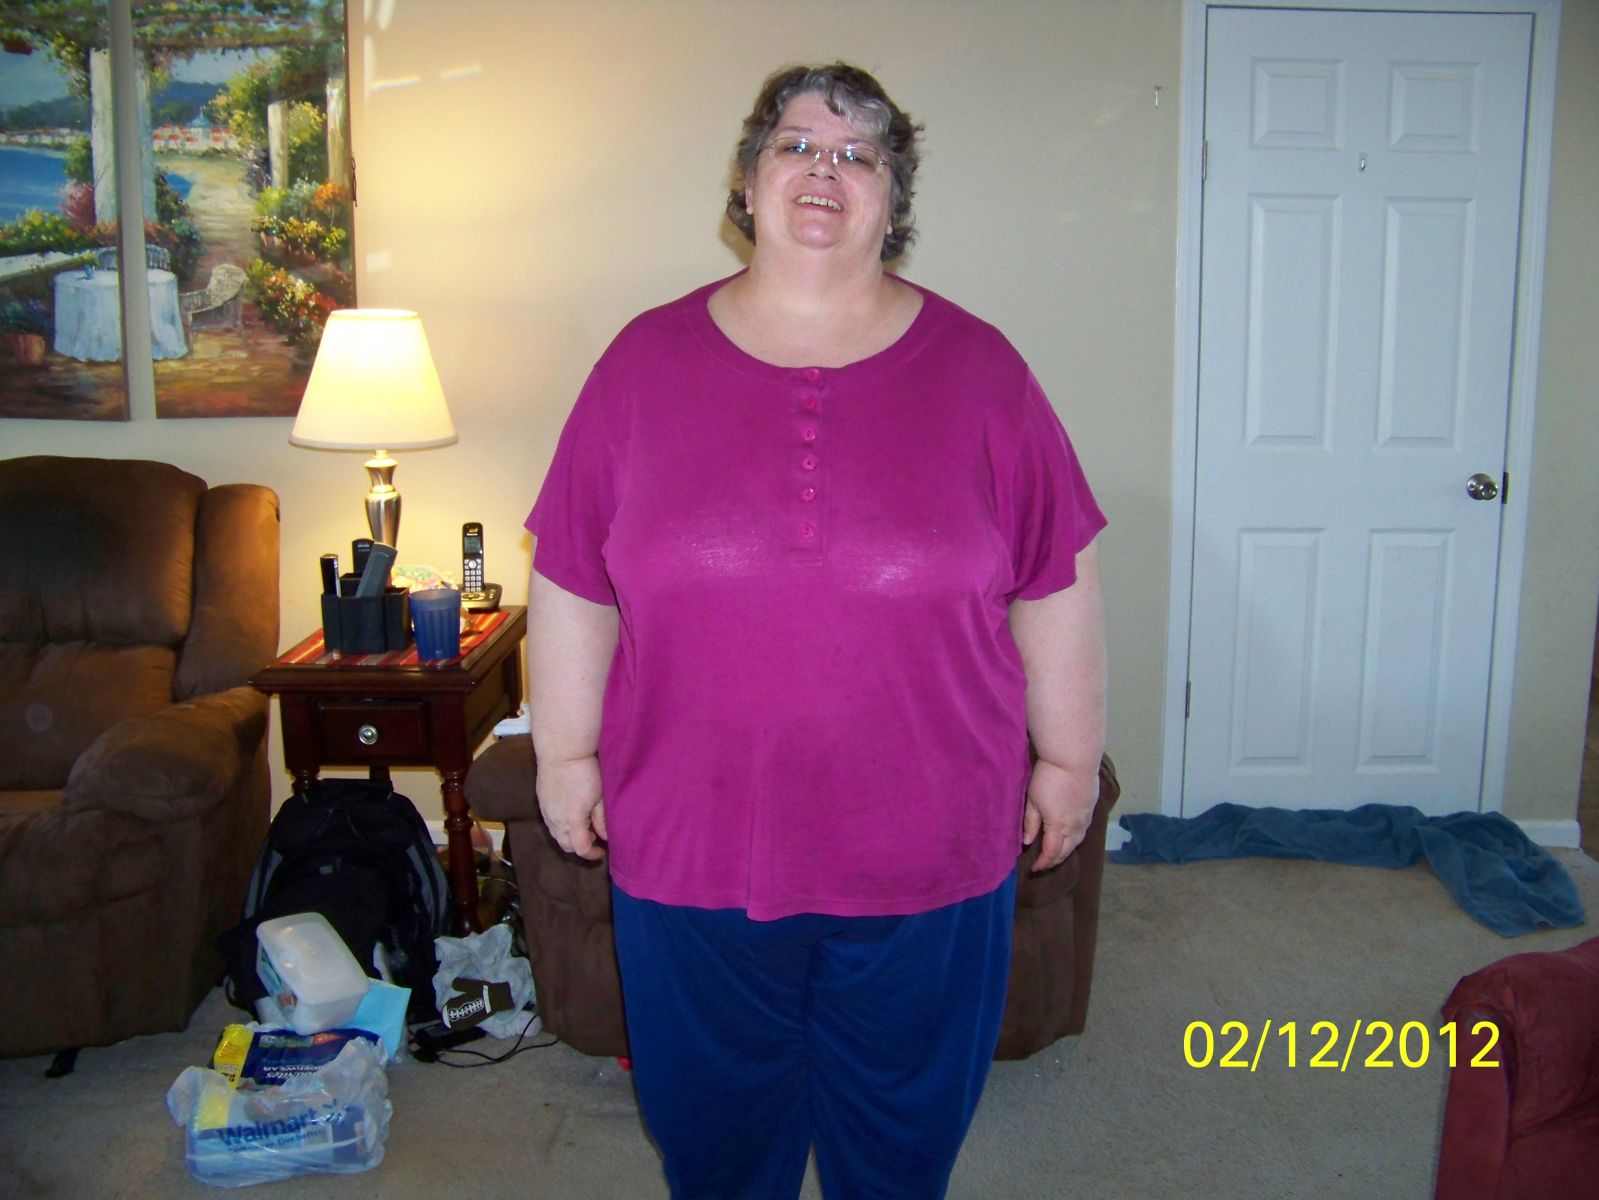 Before surgery - 331 lbs